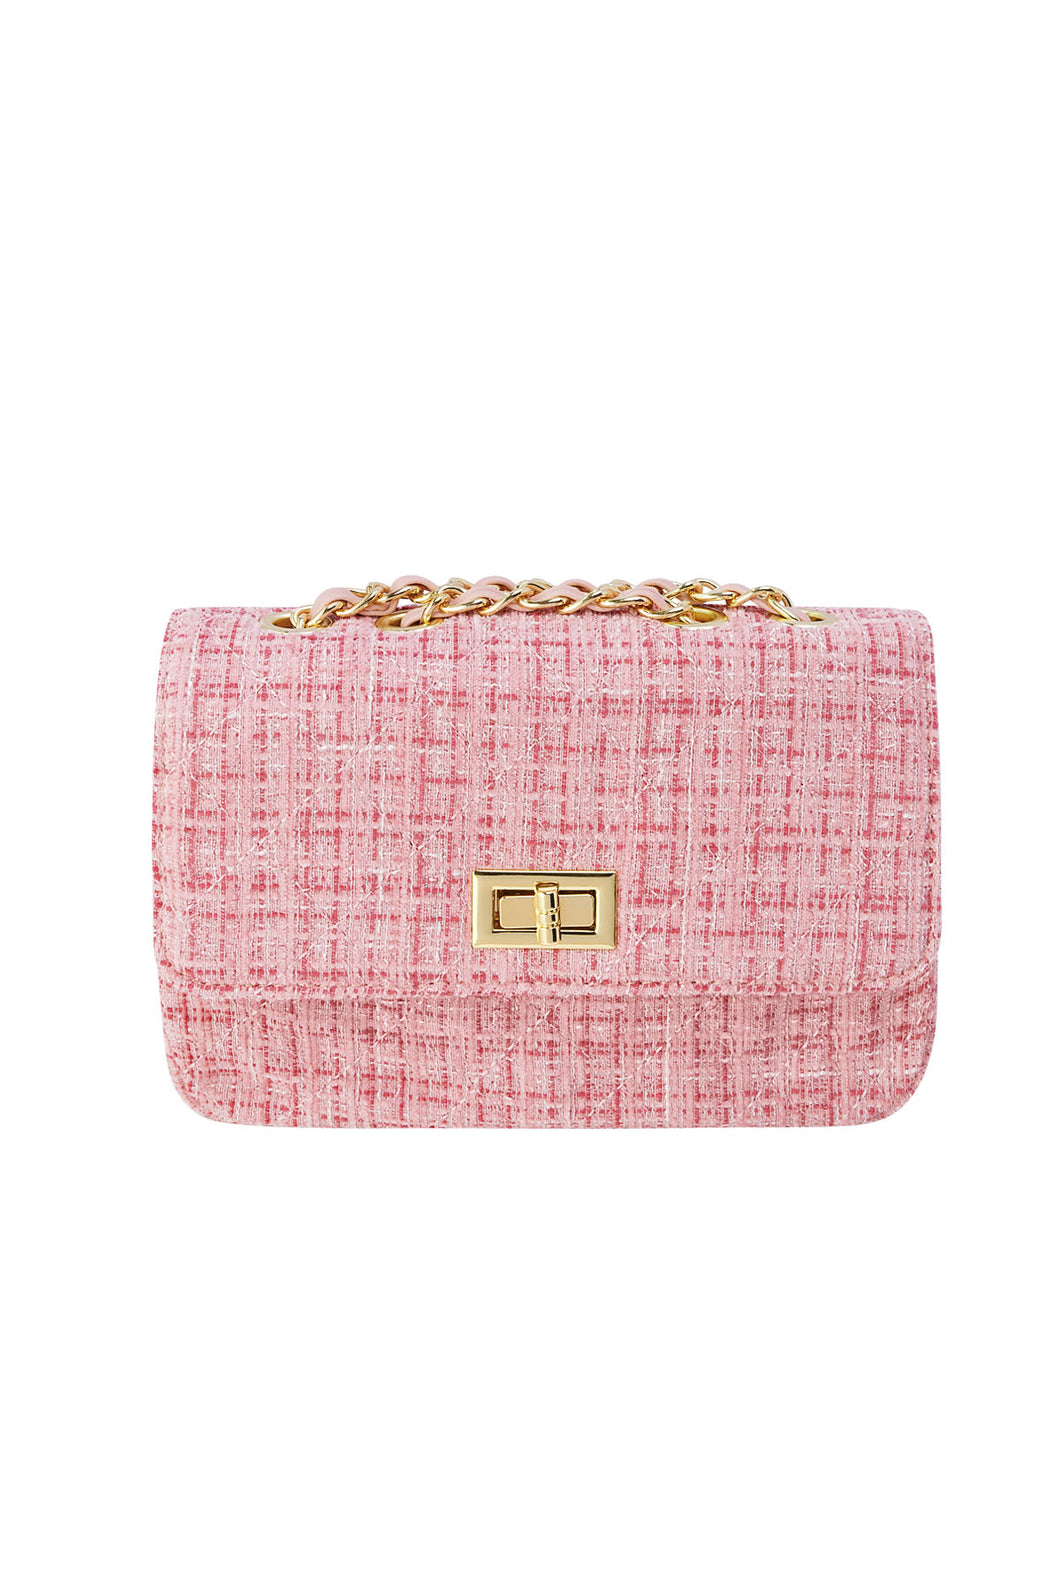 French Vibes Crossbody Bag - pink